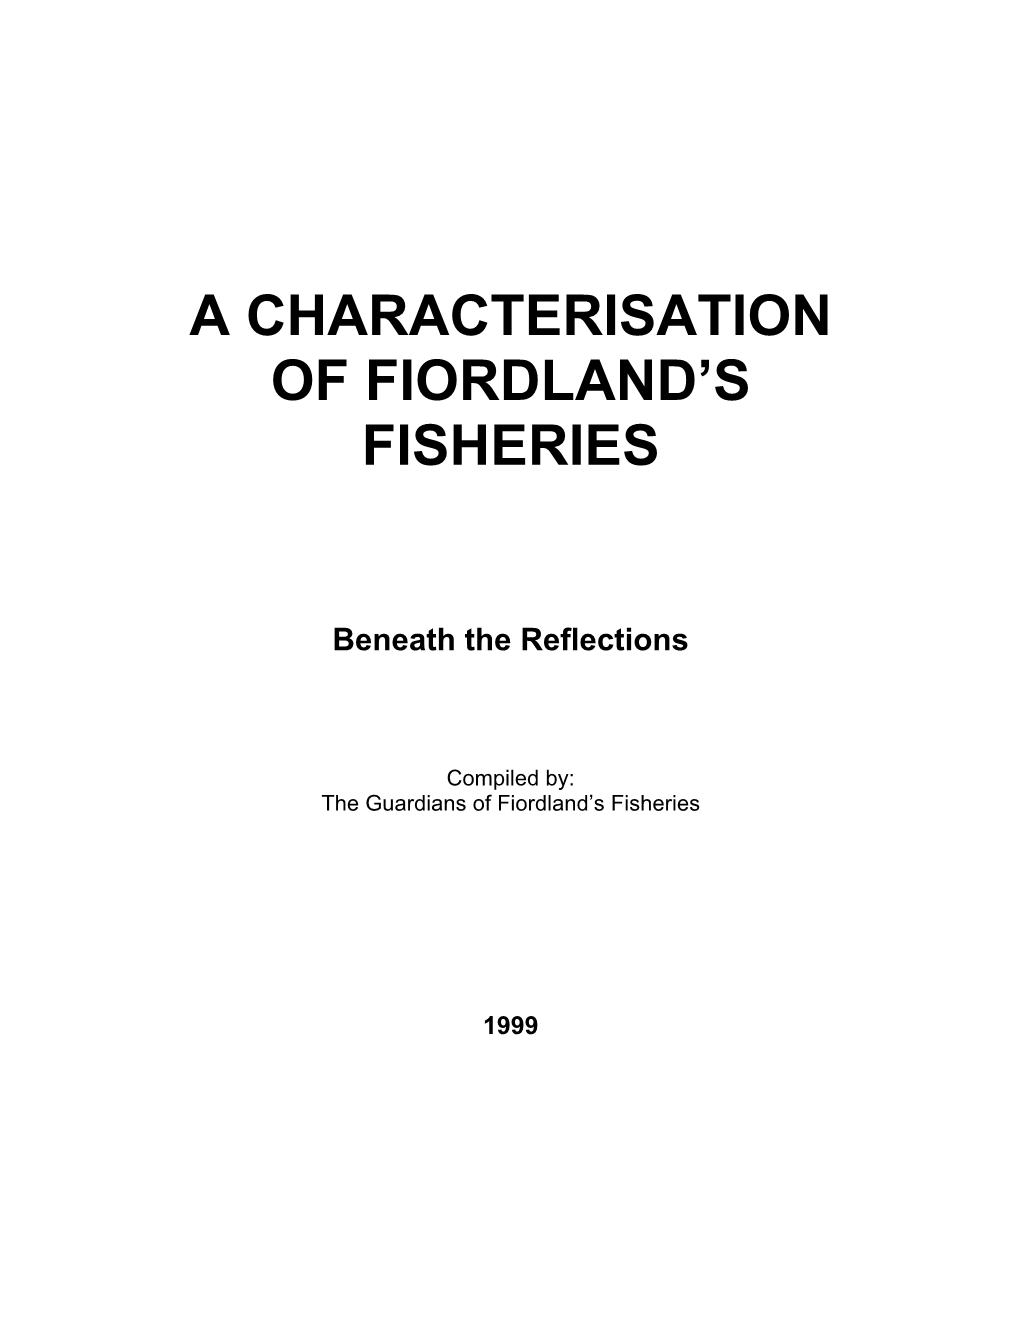 A Characterisation of Fiordland's Fisheries